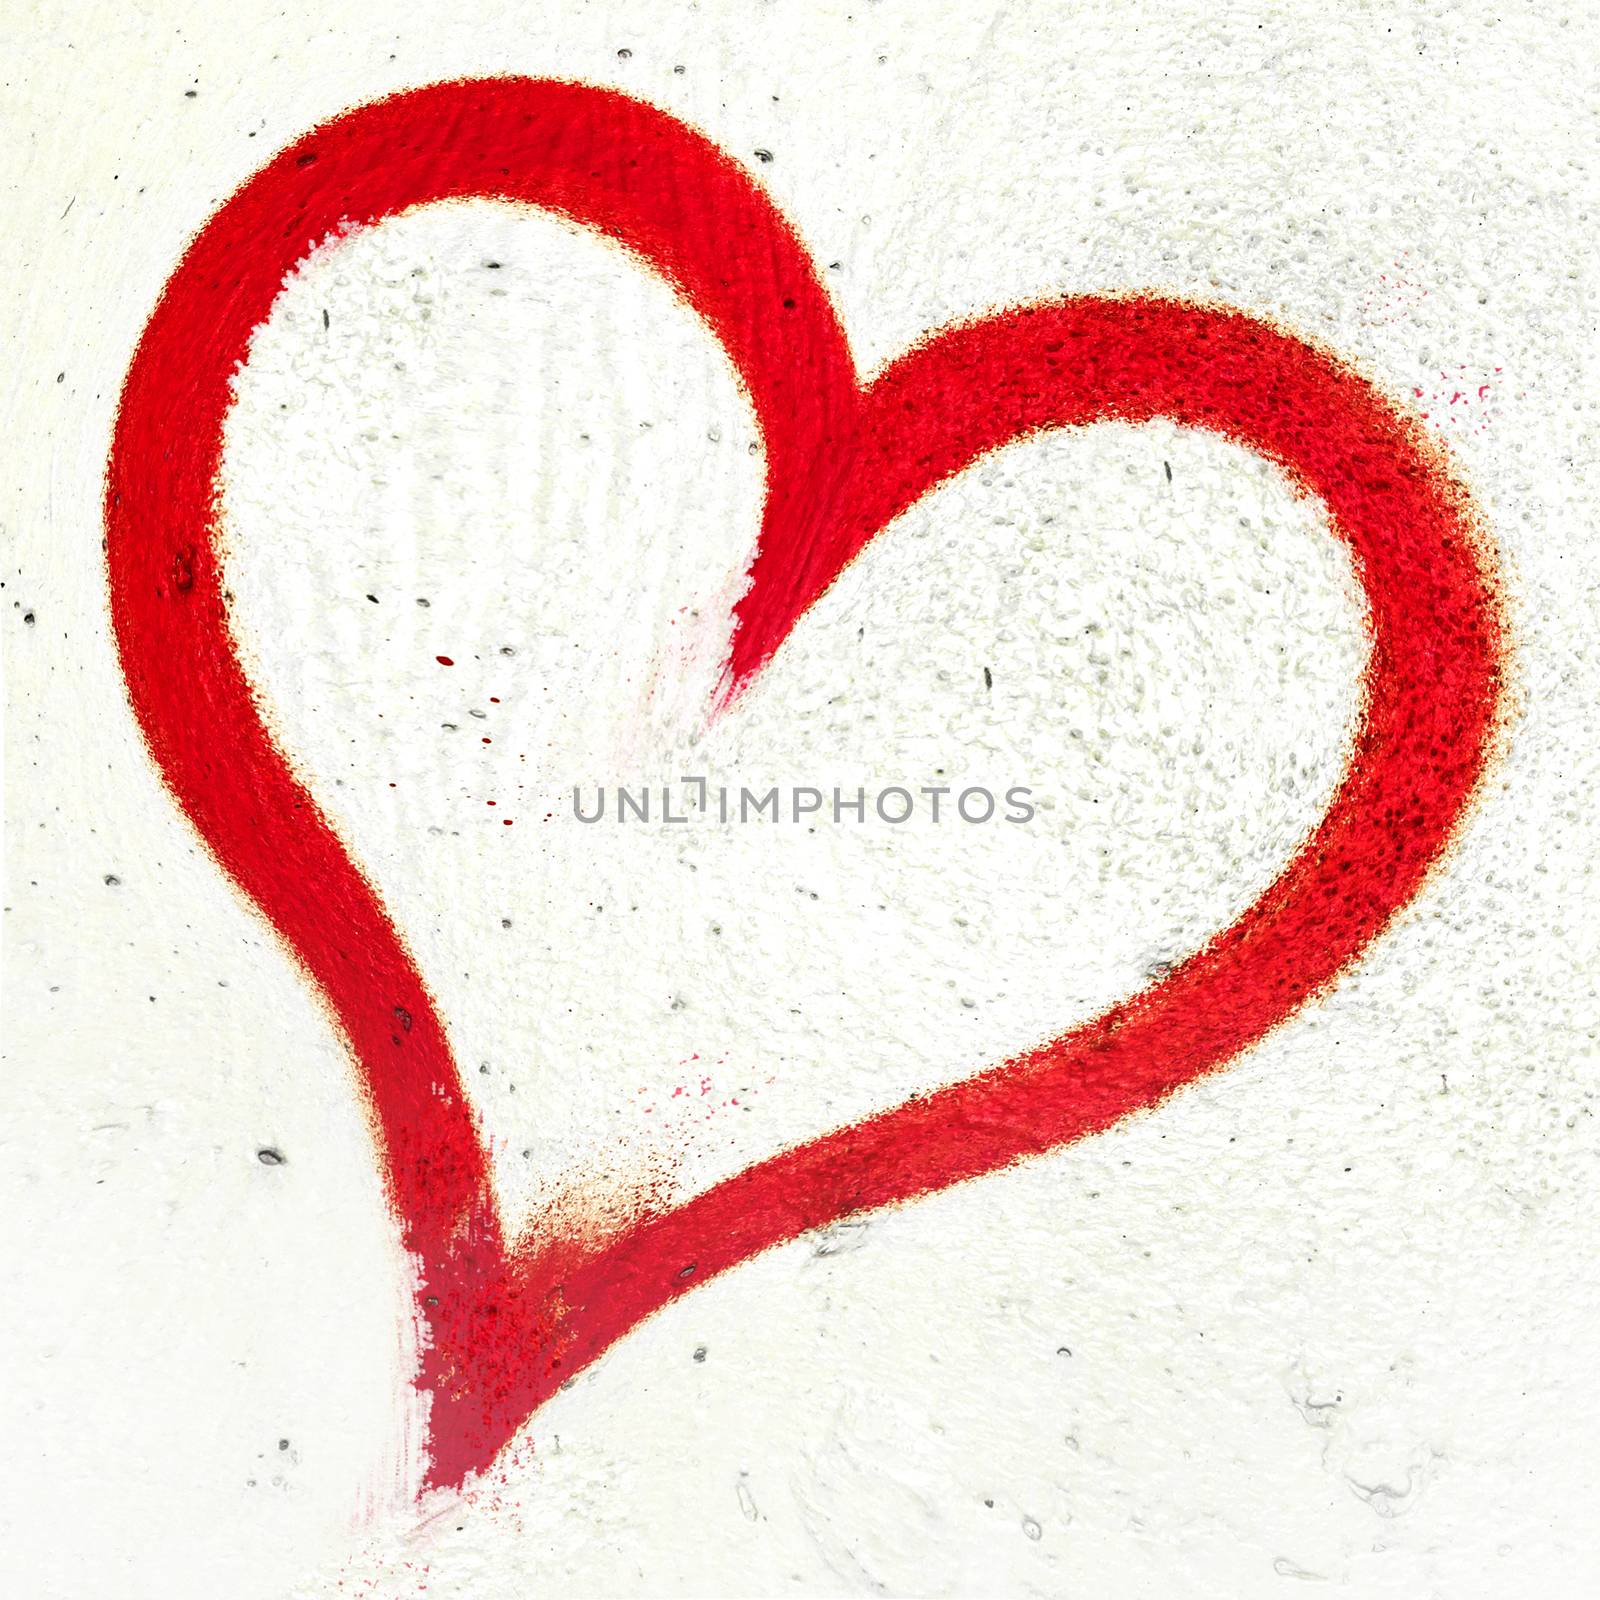 Concept or conceptual painted red abstract heart shape love symbol, dirty wall background, metaphor to urban and romantic valentine, grungy style.